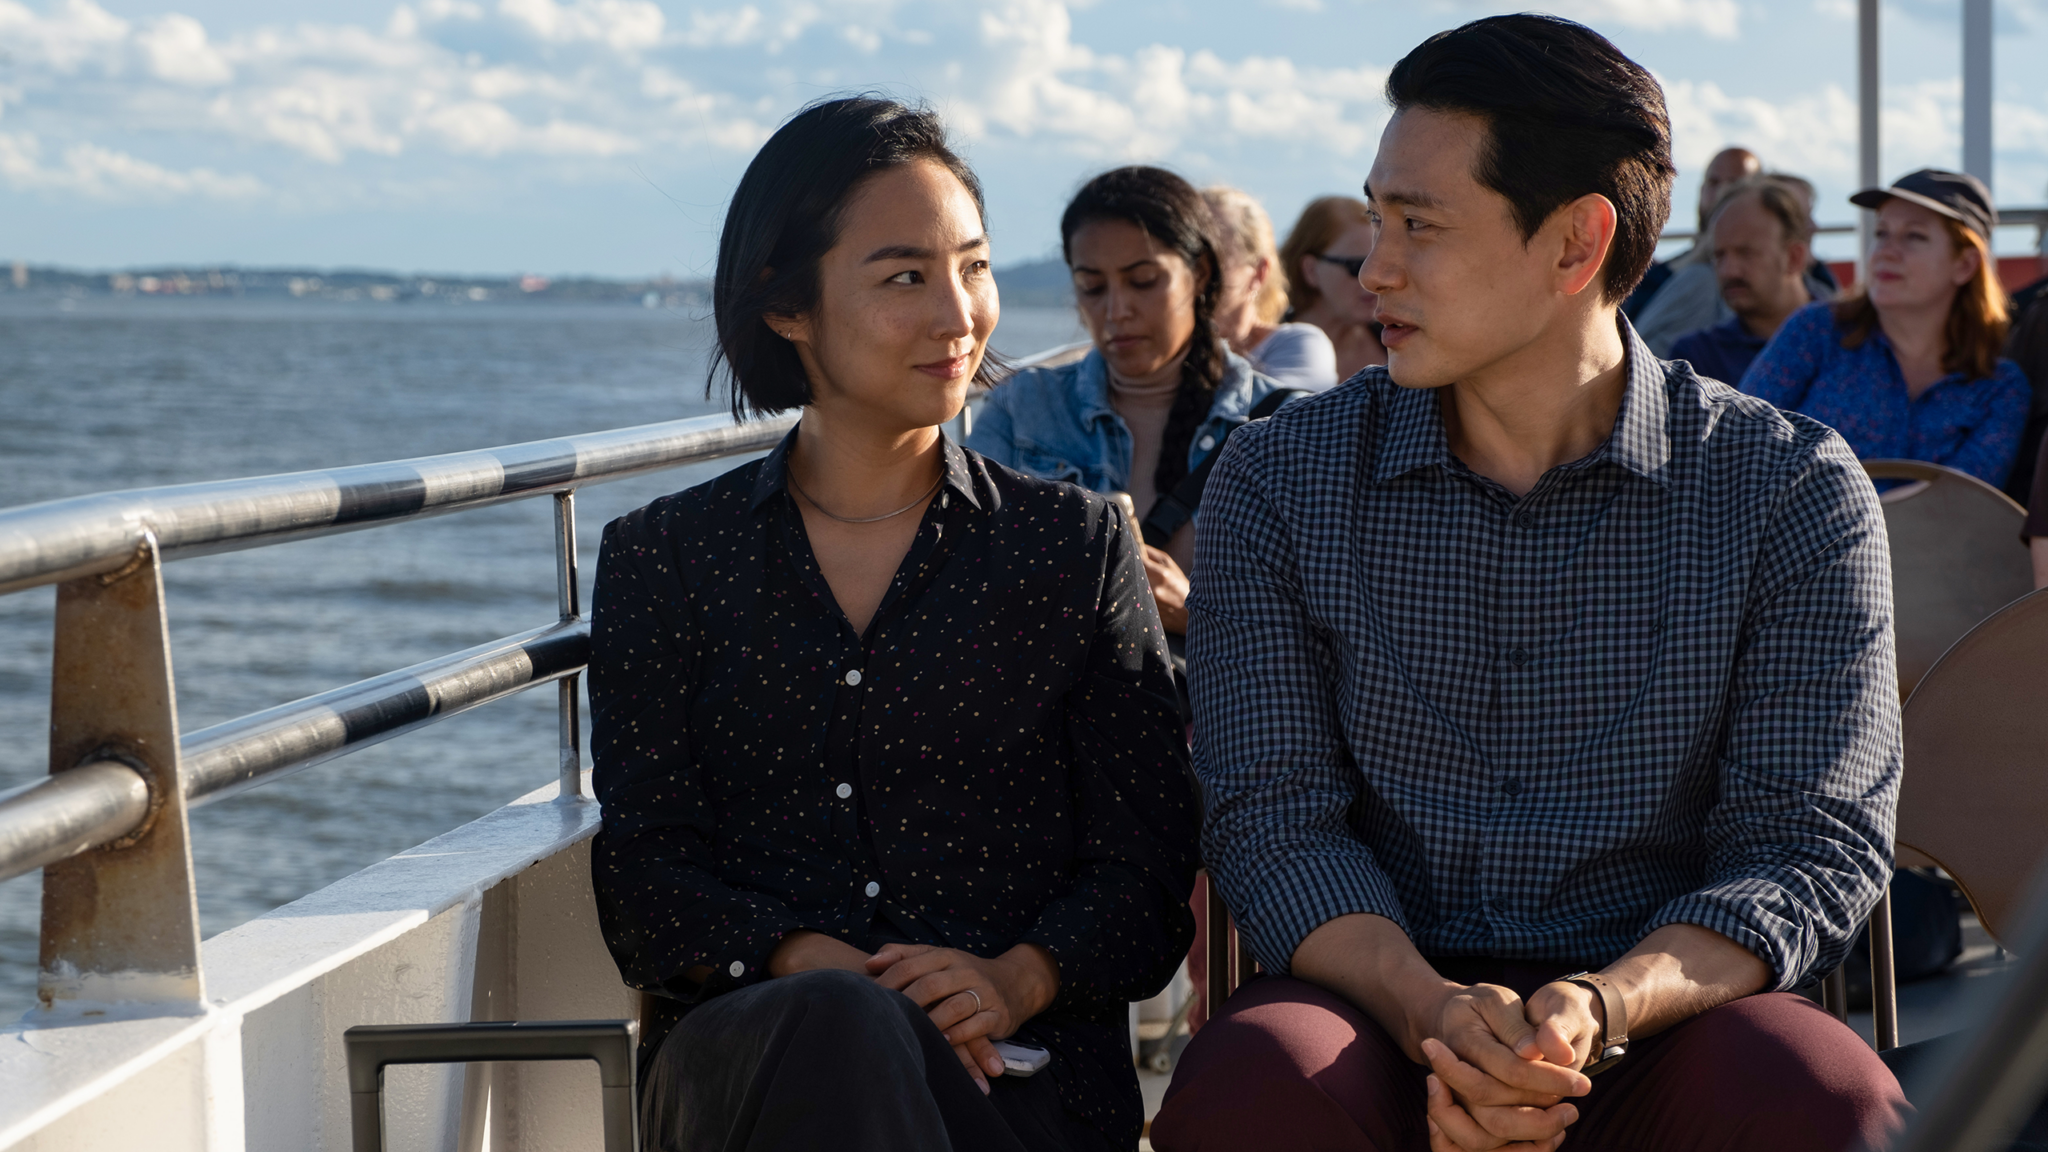 Young Asian woman and man sit side-by-side looking at each other, on a boat also transporting other people.